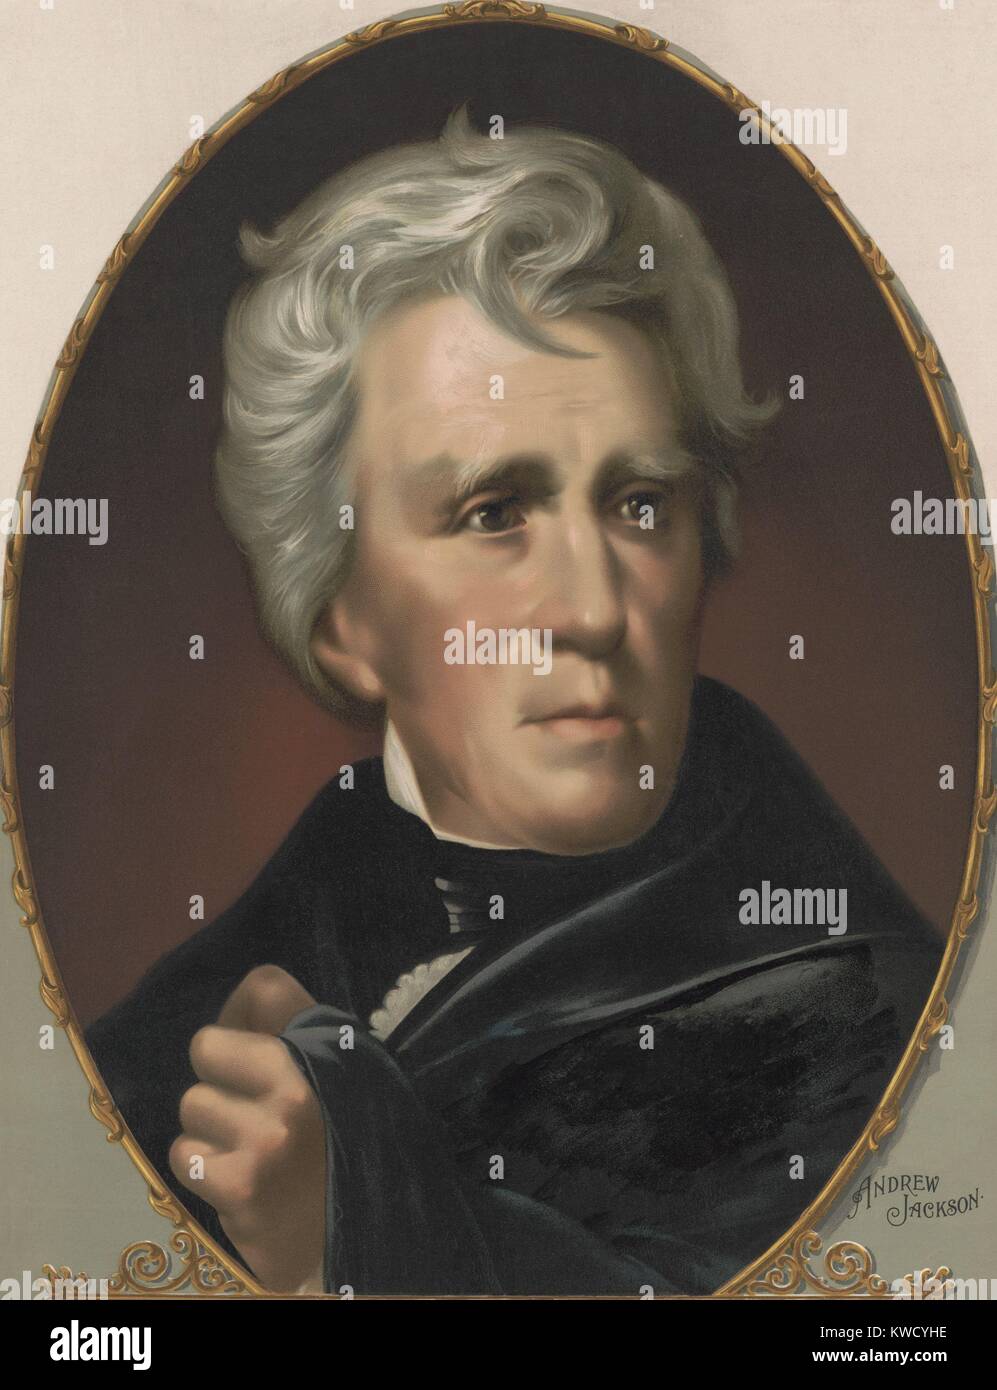 President Andrew Jackson, oval chromolithograph printed in 1896 (BSLOC 2017 6 15) Stock Photo